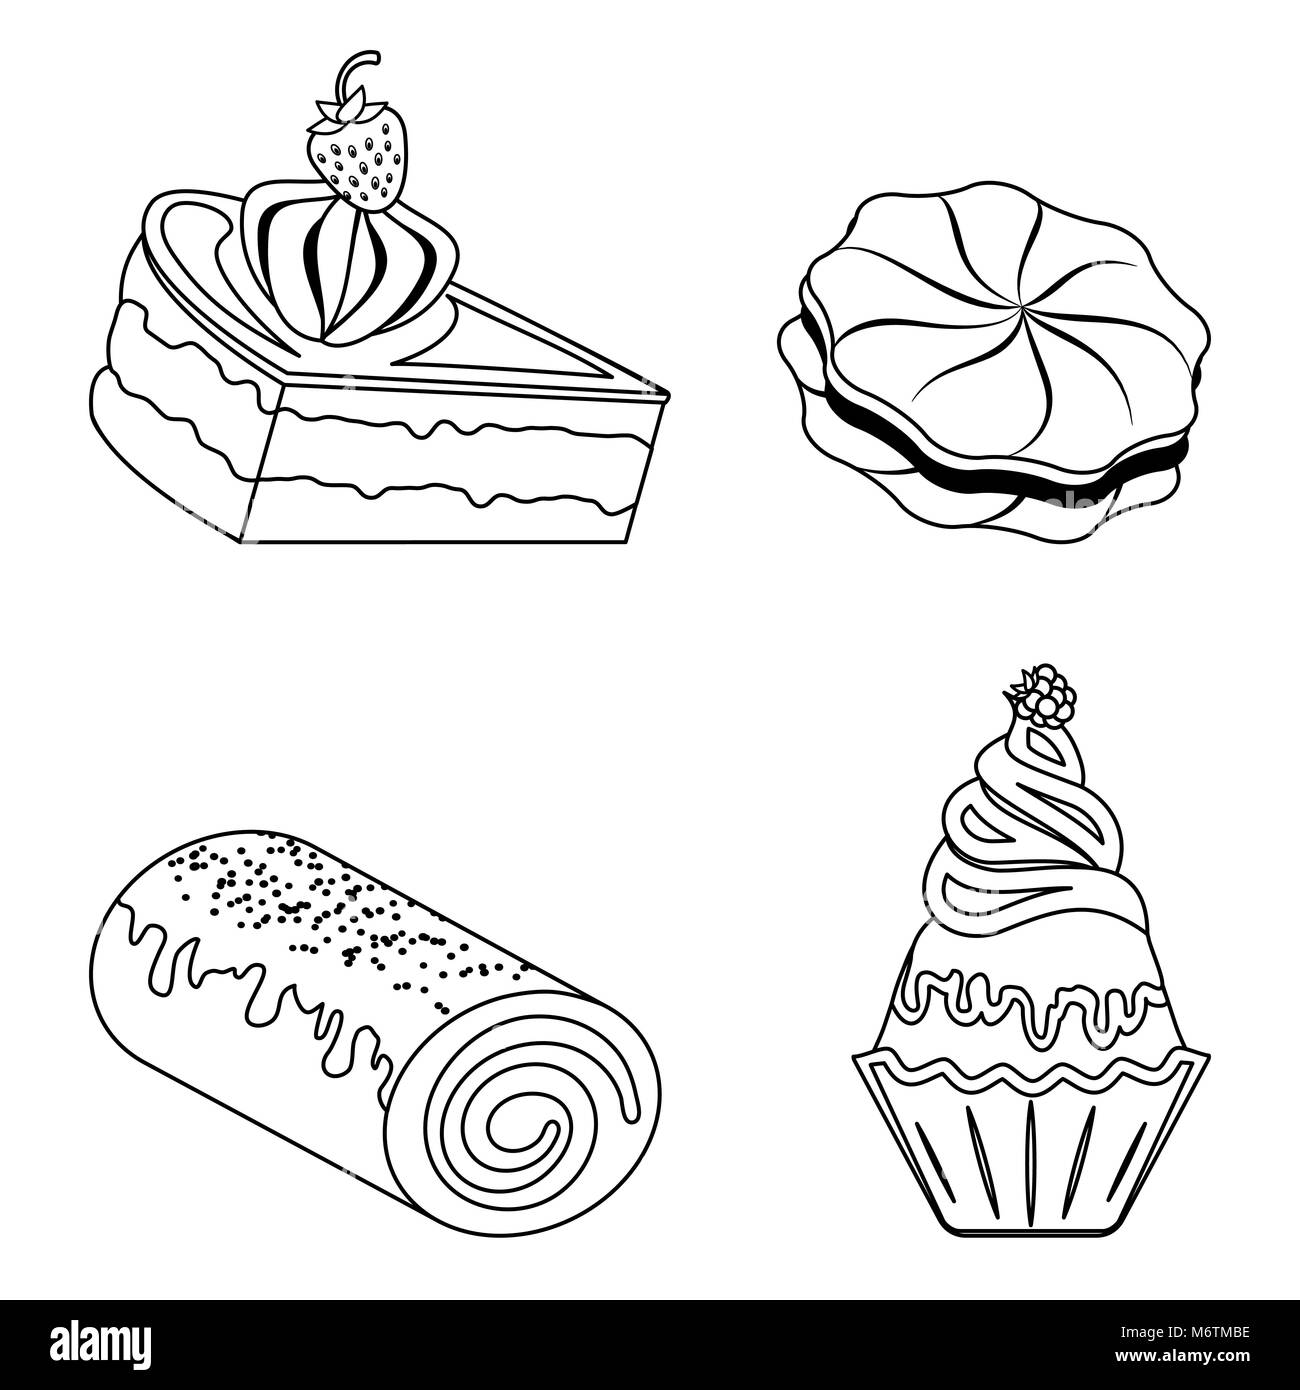 Confection, bakery products Stock Vector